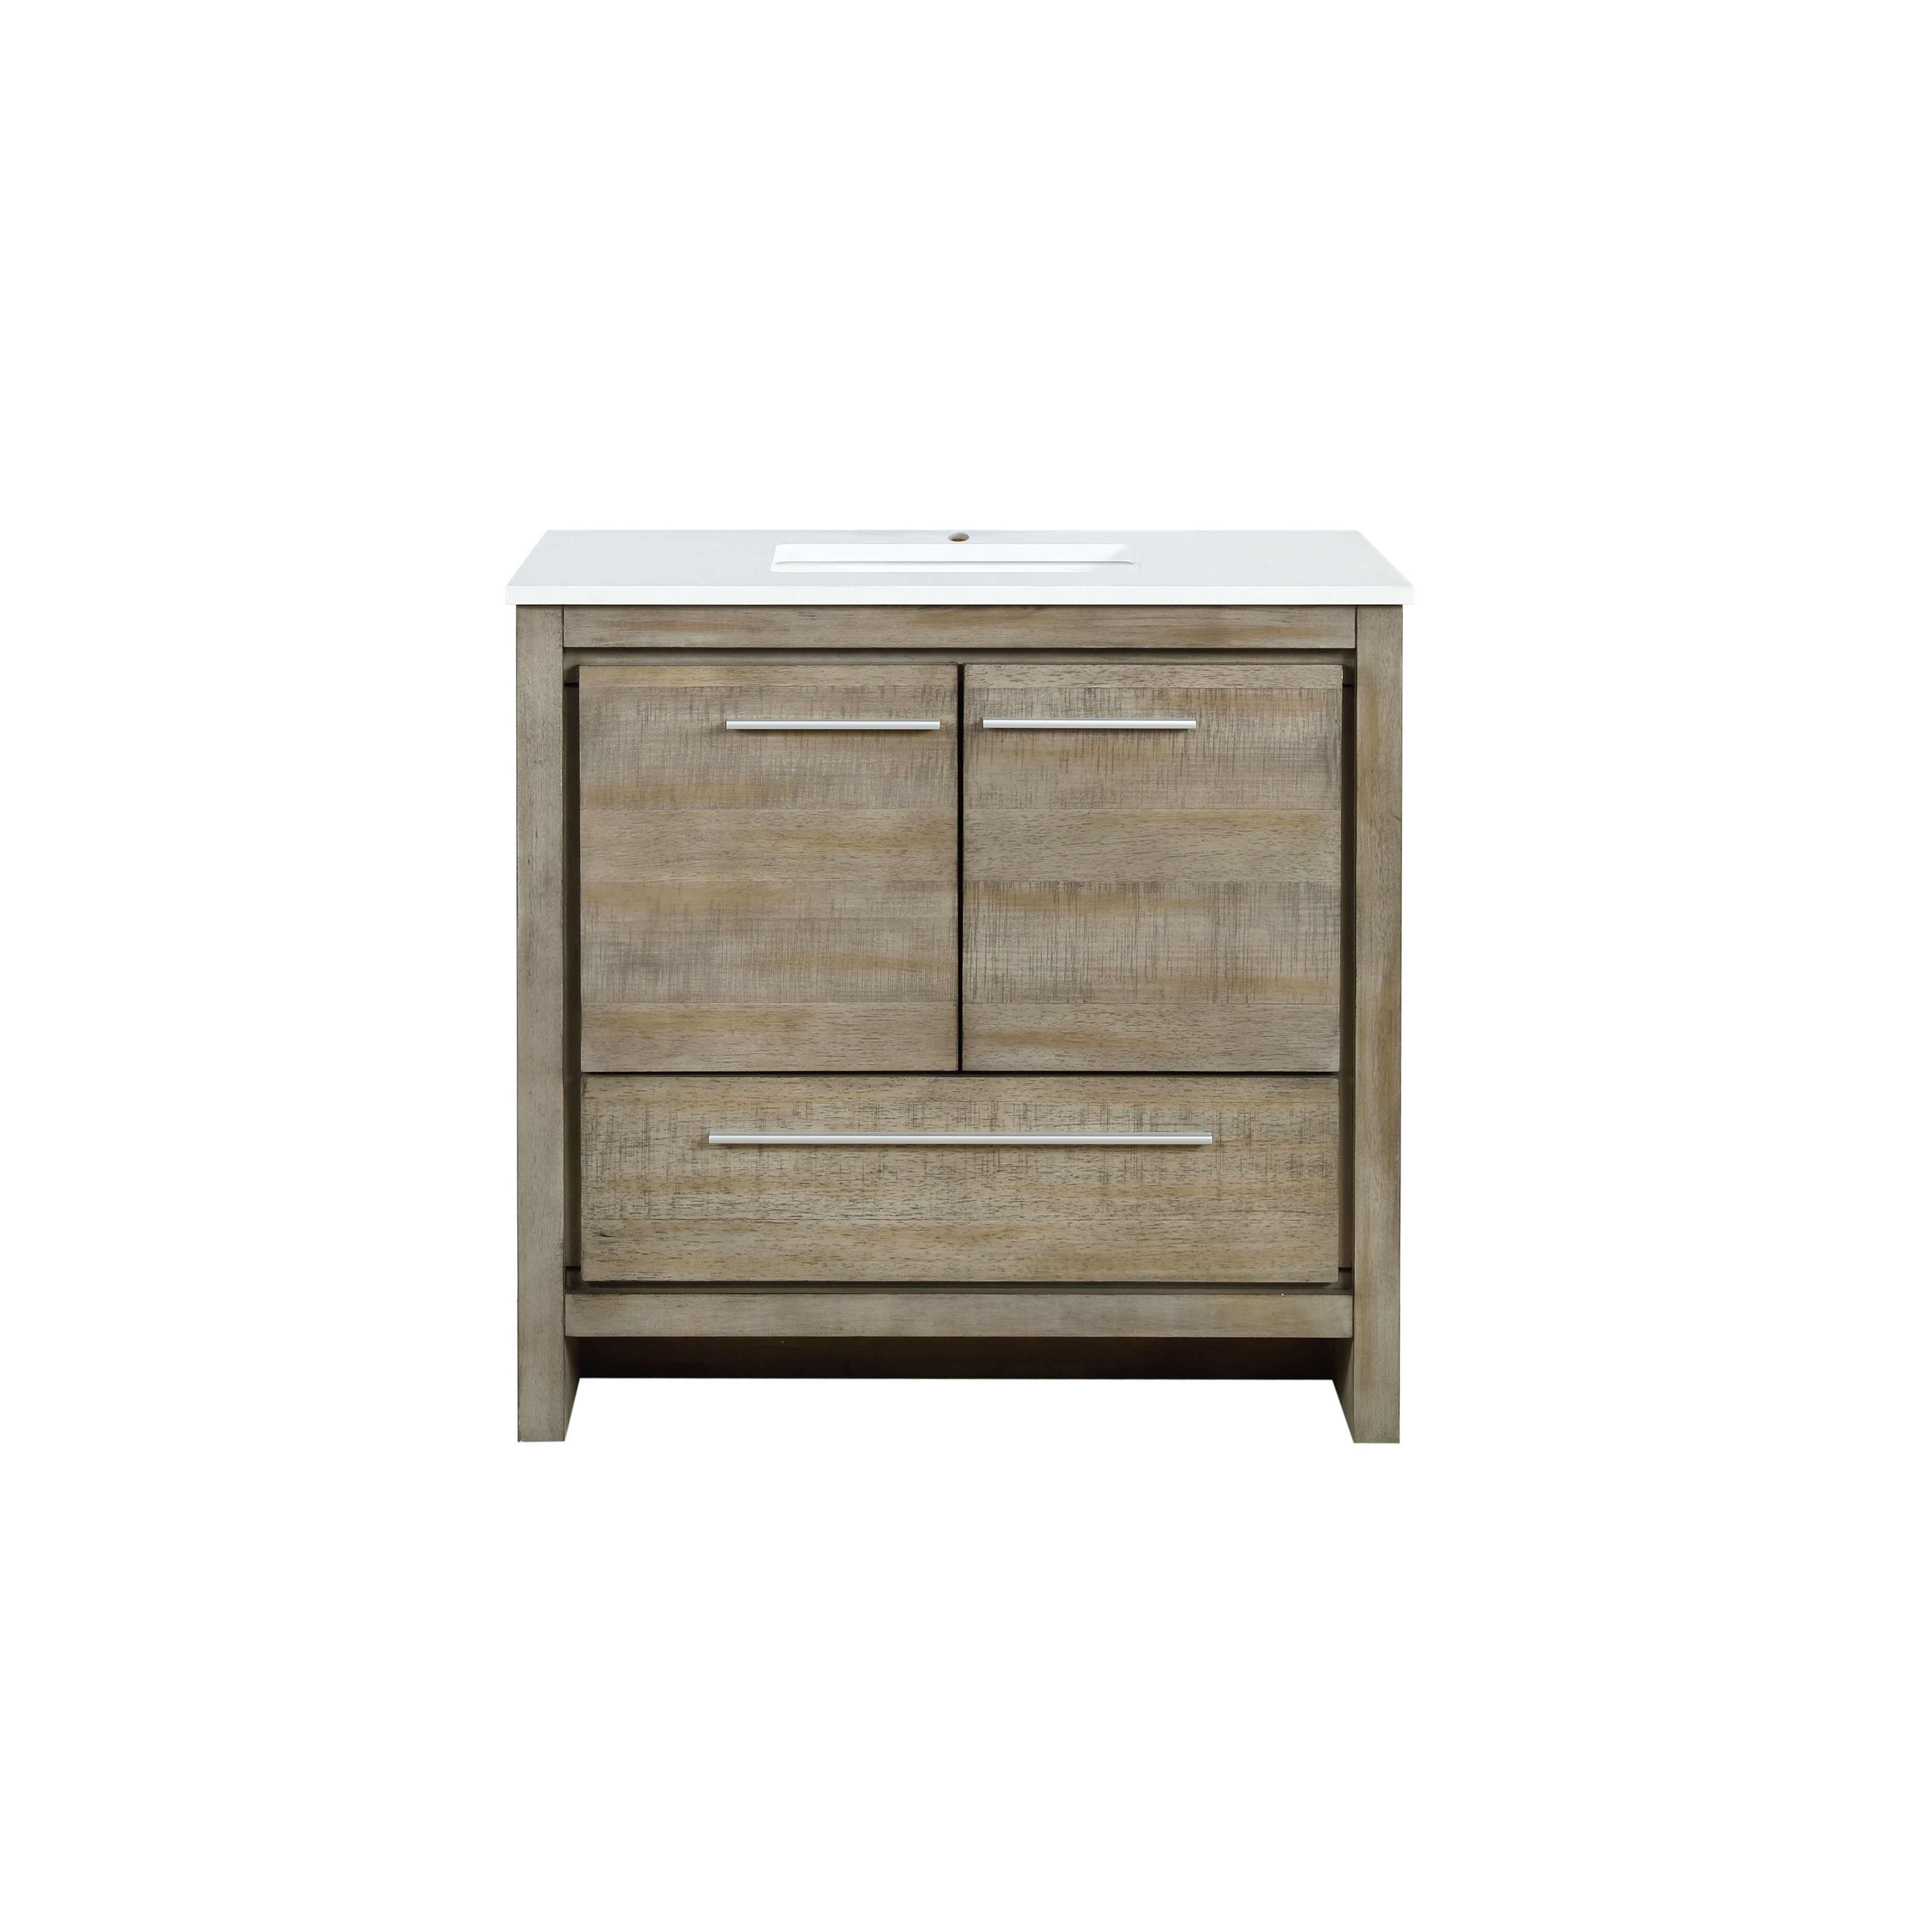 Lexora Lafarre LLF36SKSOS000 36" Single Bathroom Vanity in Rustic Acacia with White Quartz, White Rectangle Sink, Front View